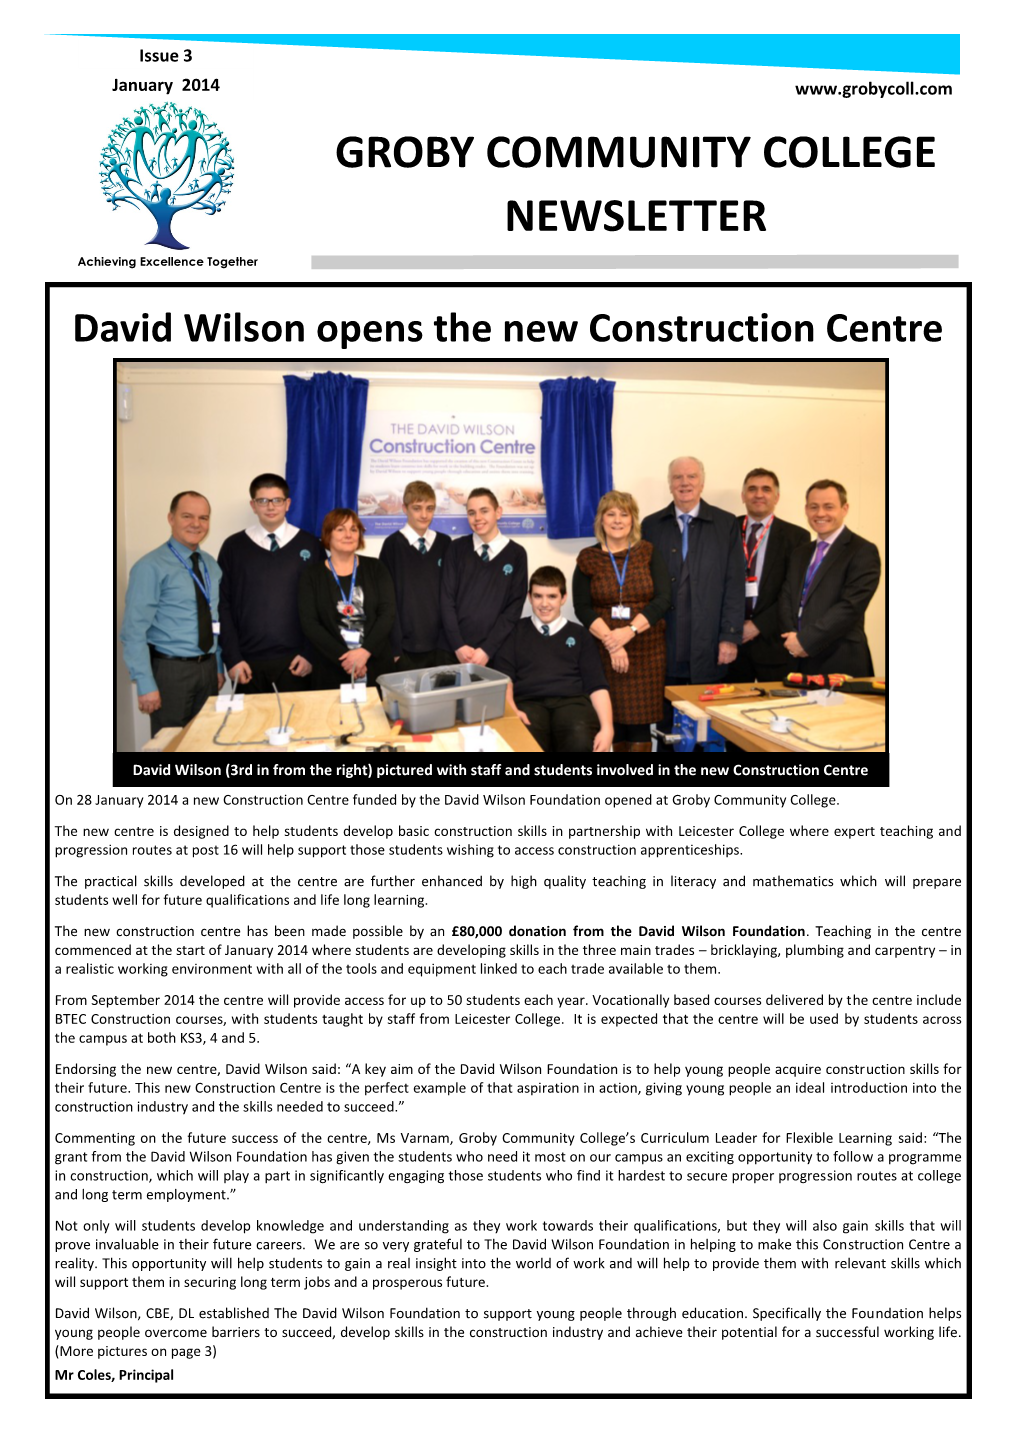 Groby Community College Newsletter